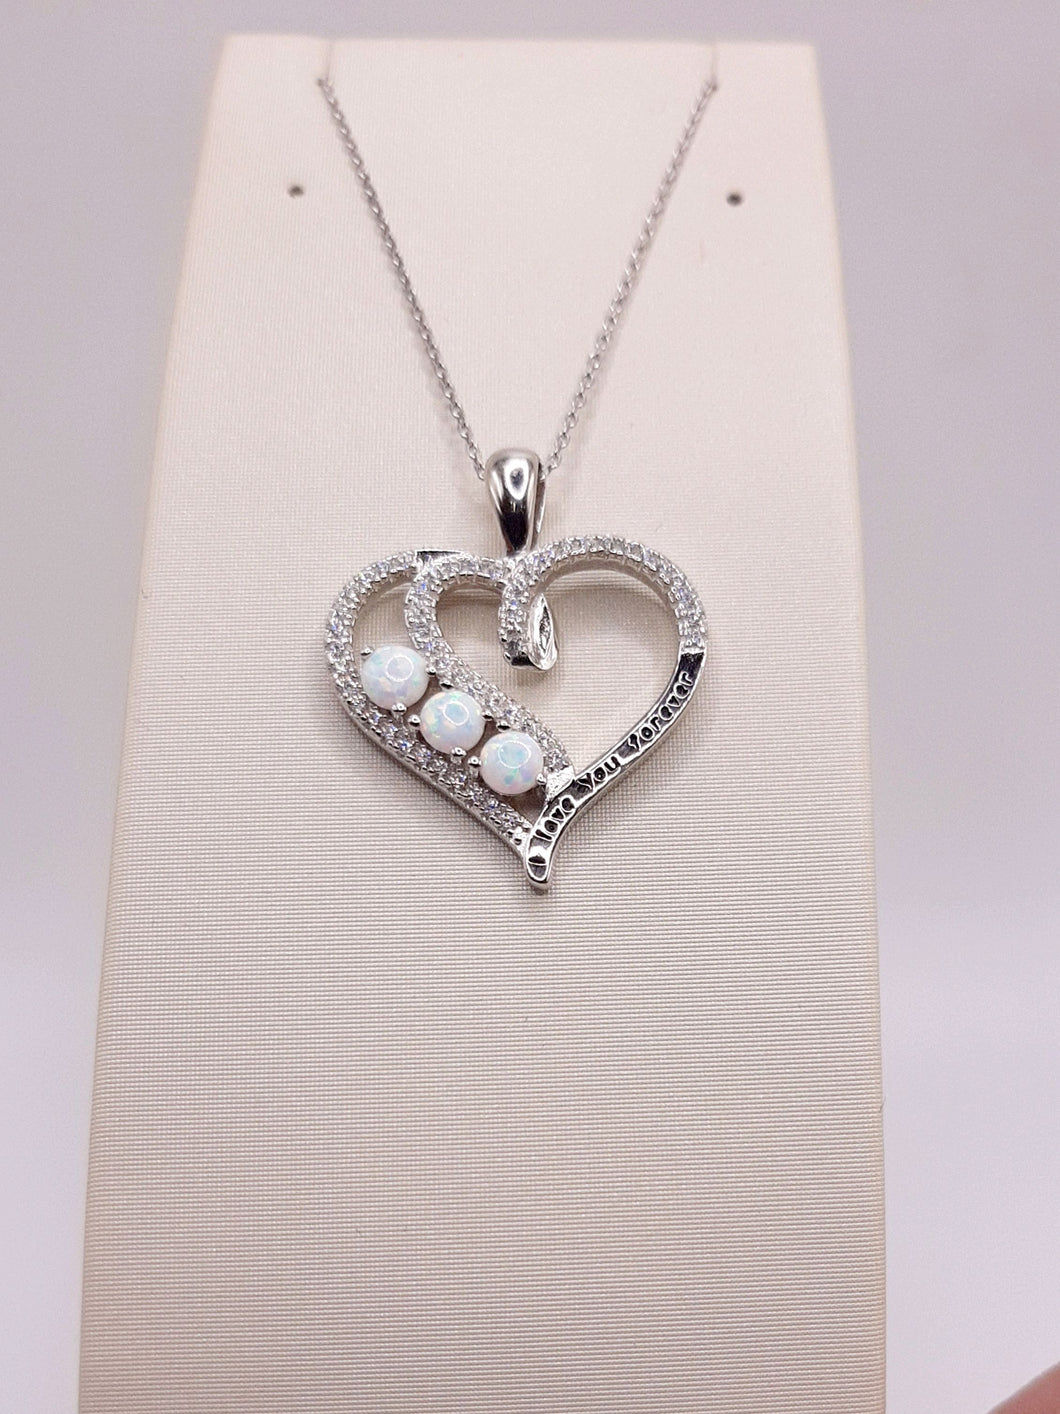 Sterling Silver Heart Necklace Featuring White Simulated Opals and Cubic Zirconium with 'I Love You Forever' on 18 